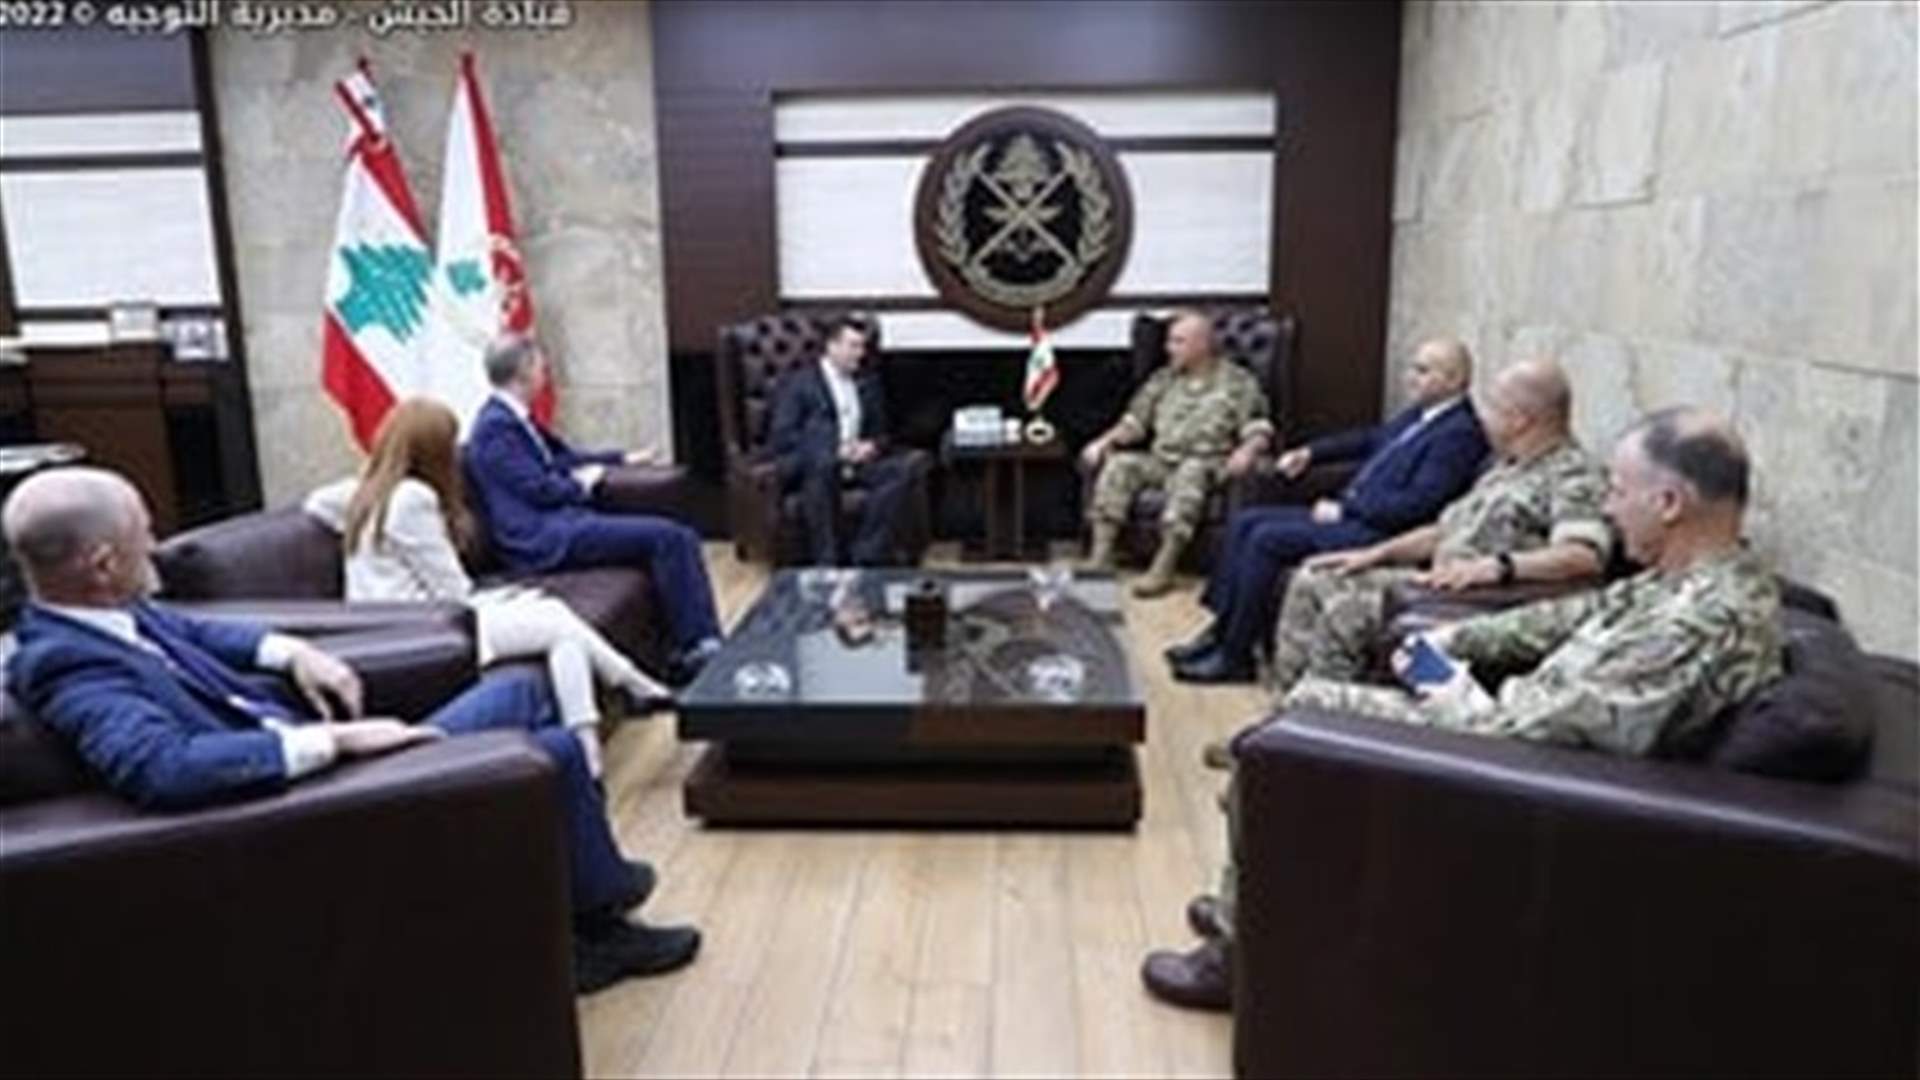 LAF Commander Aoun holds series of meetings-[PHOTOS]